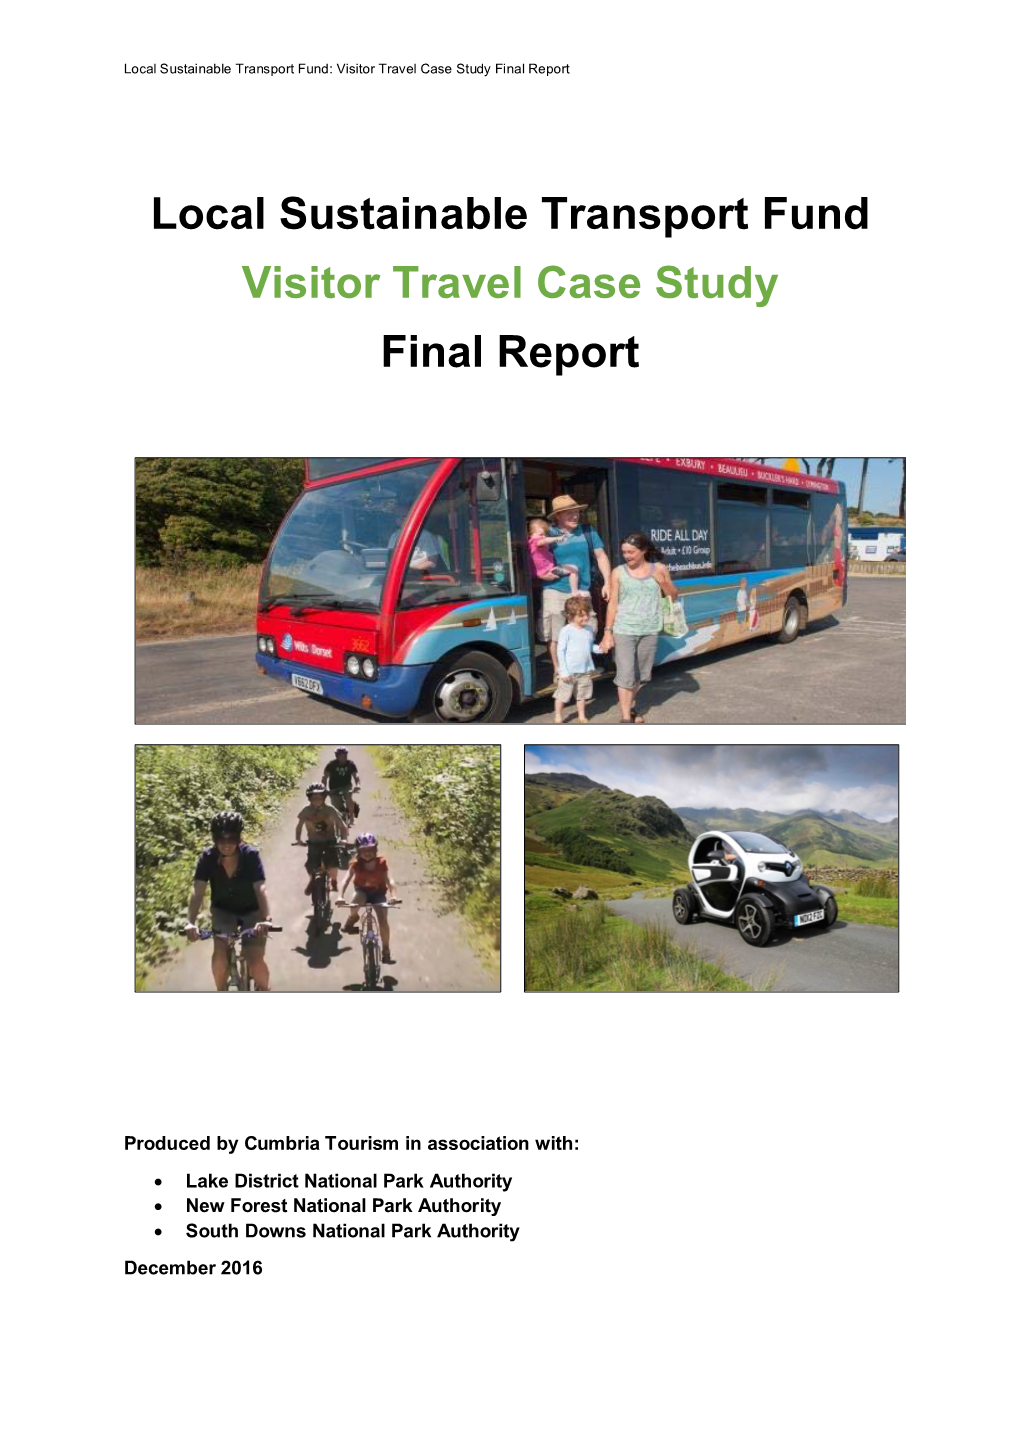 Local Sustainable Transport Fund Visitor Travel Case Study Final Report